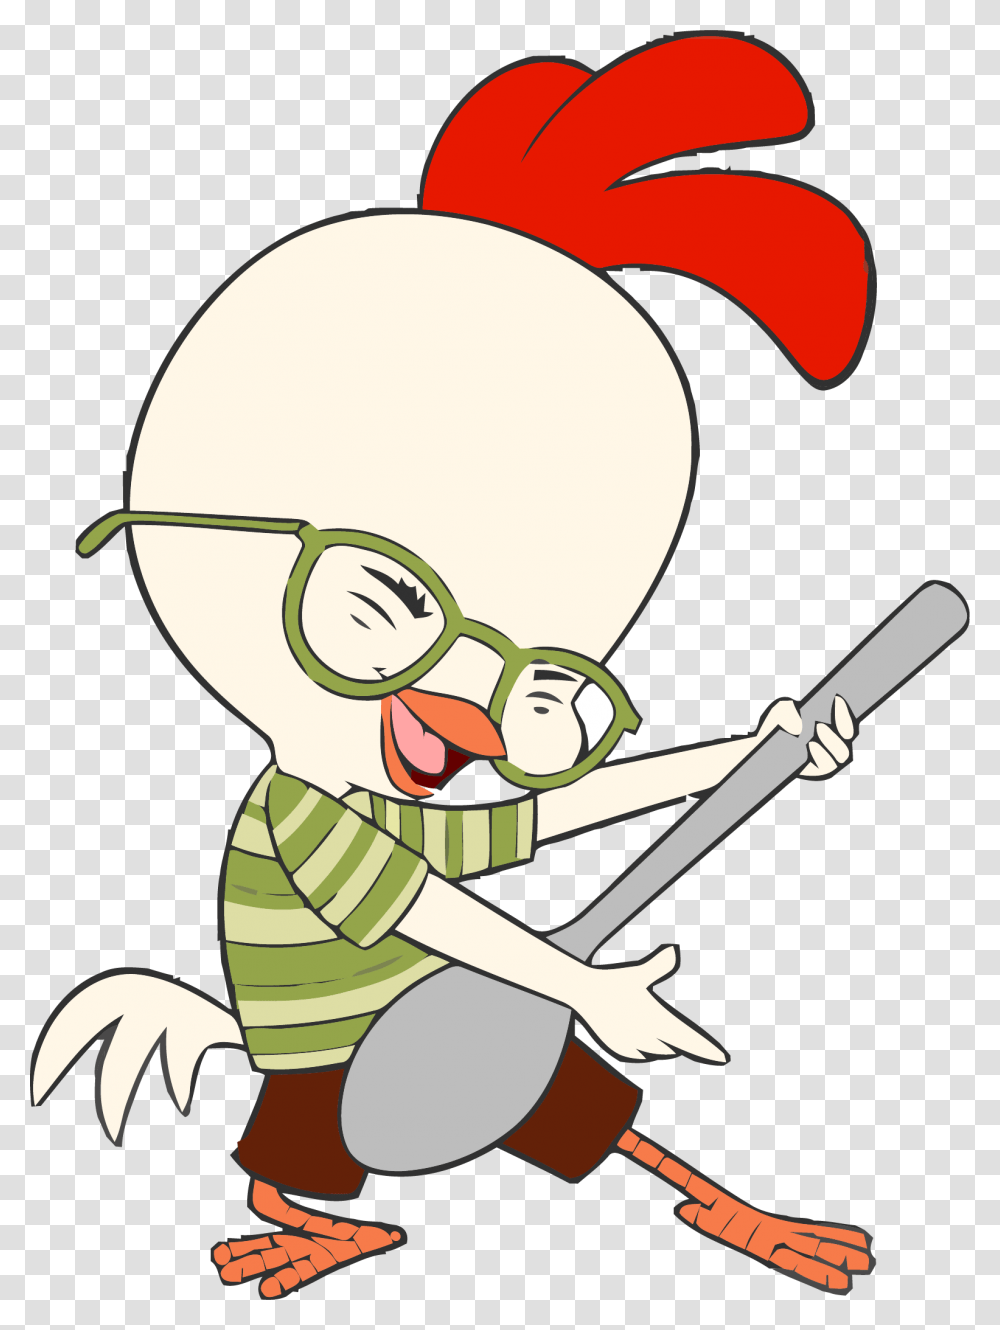 Clip Art Chicken Animation Cartoon Songs, Drawing, Cleaning, Glasses, Accessories Transparent Png